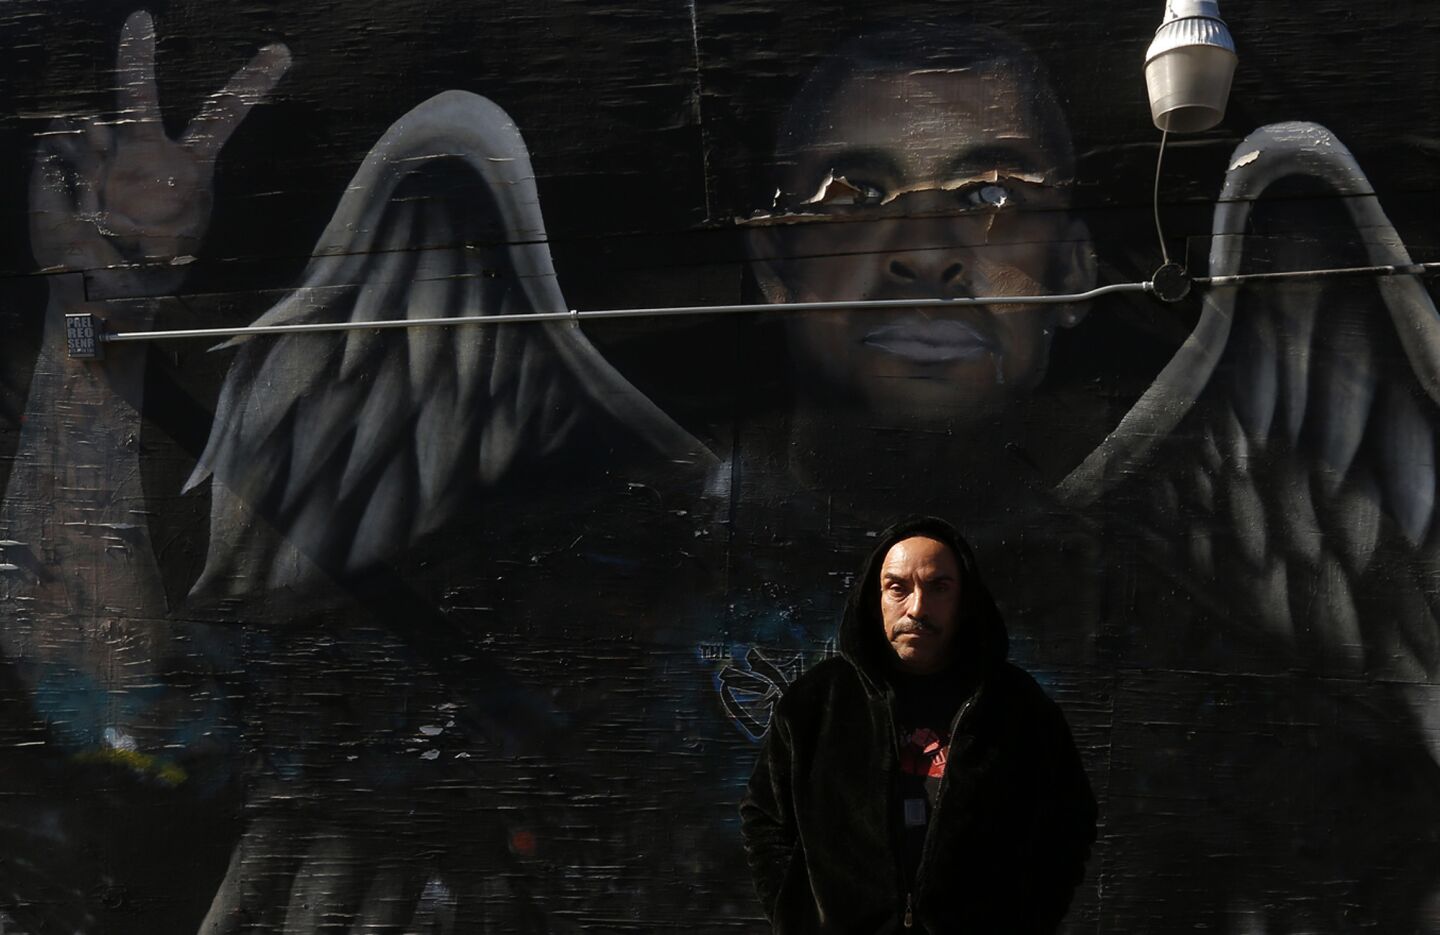 Ricardo Guerrero, social/art director at The Graff Lab, stands in front of a mural created in memory of Juan Carlos De La Piedra in the Pico Union area of the Westlake neighborhood. De La Piedra was fatally shot in 2012 in a walk-up shooting that police believe was gang-related.